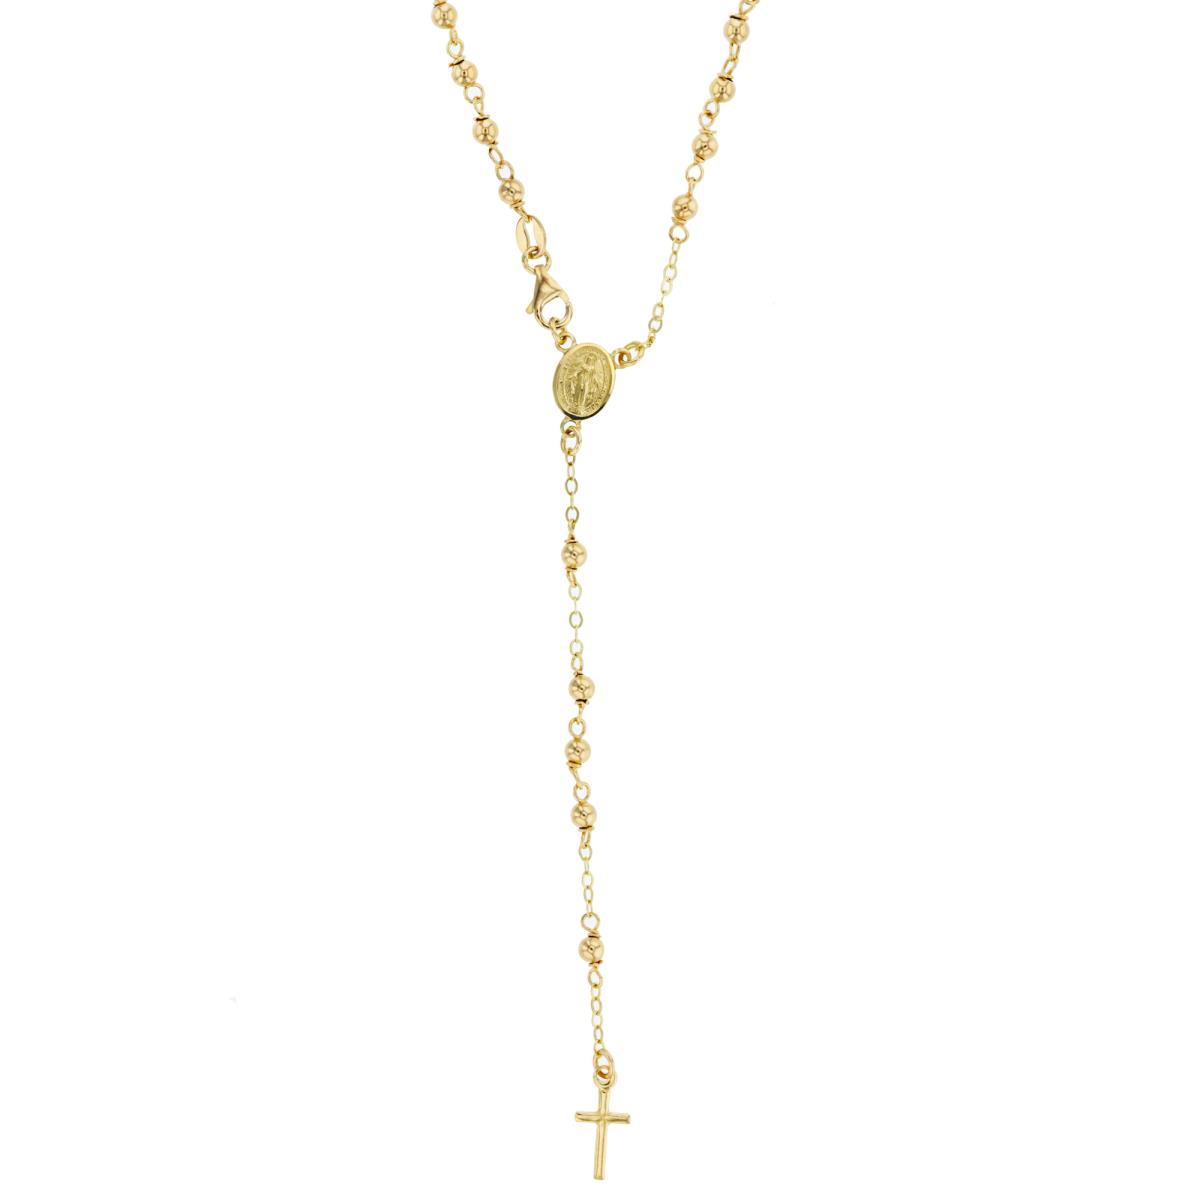 14K Yellow Gold 3mm Polished Beaded 25" Rosary Necklace